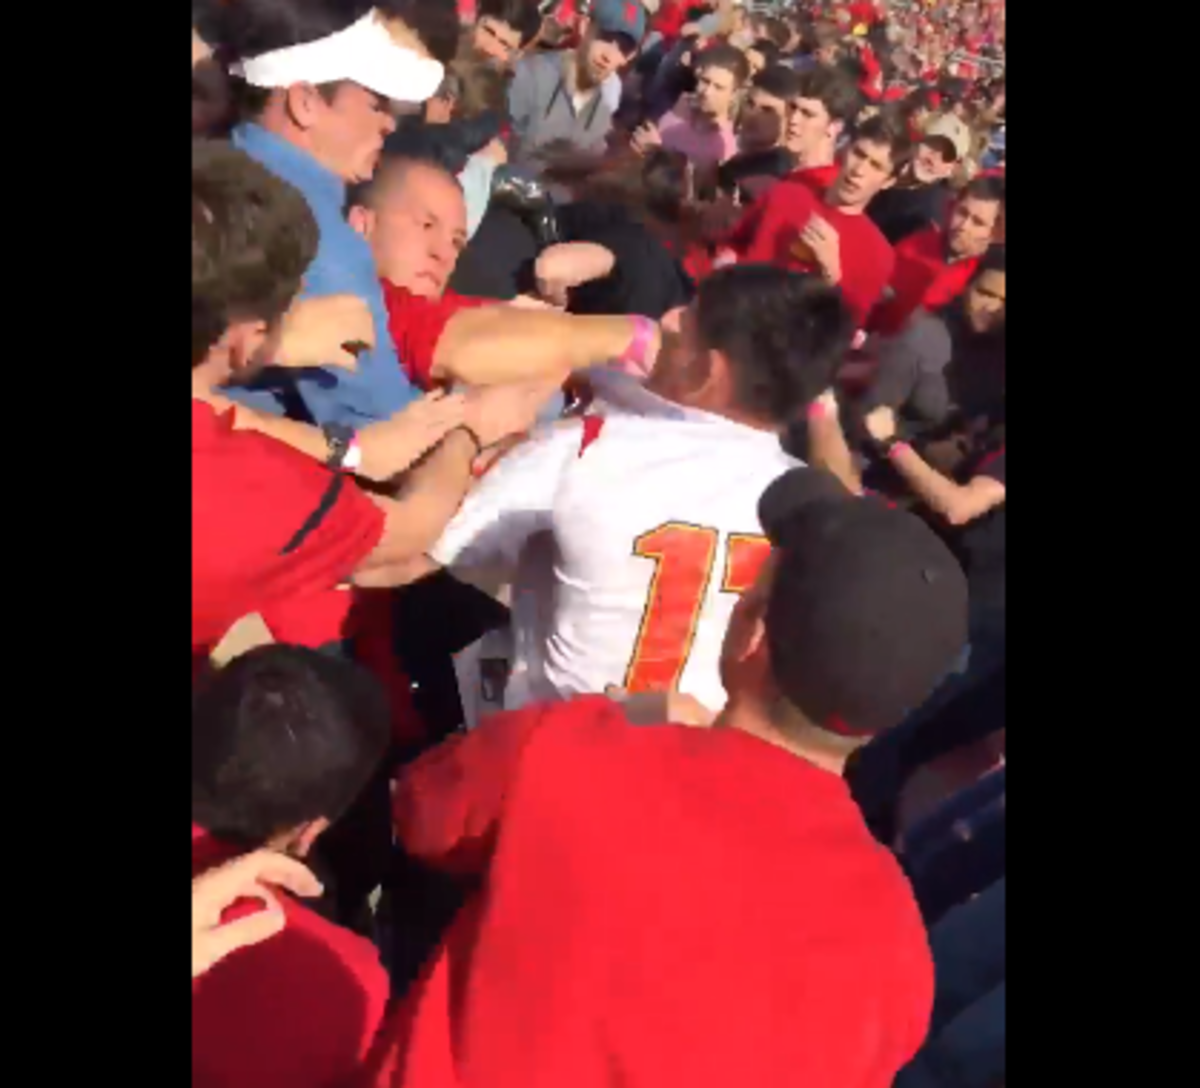 A fight breaks out in the Louisville stands.